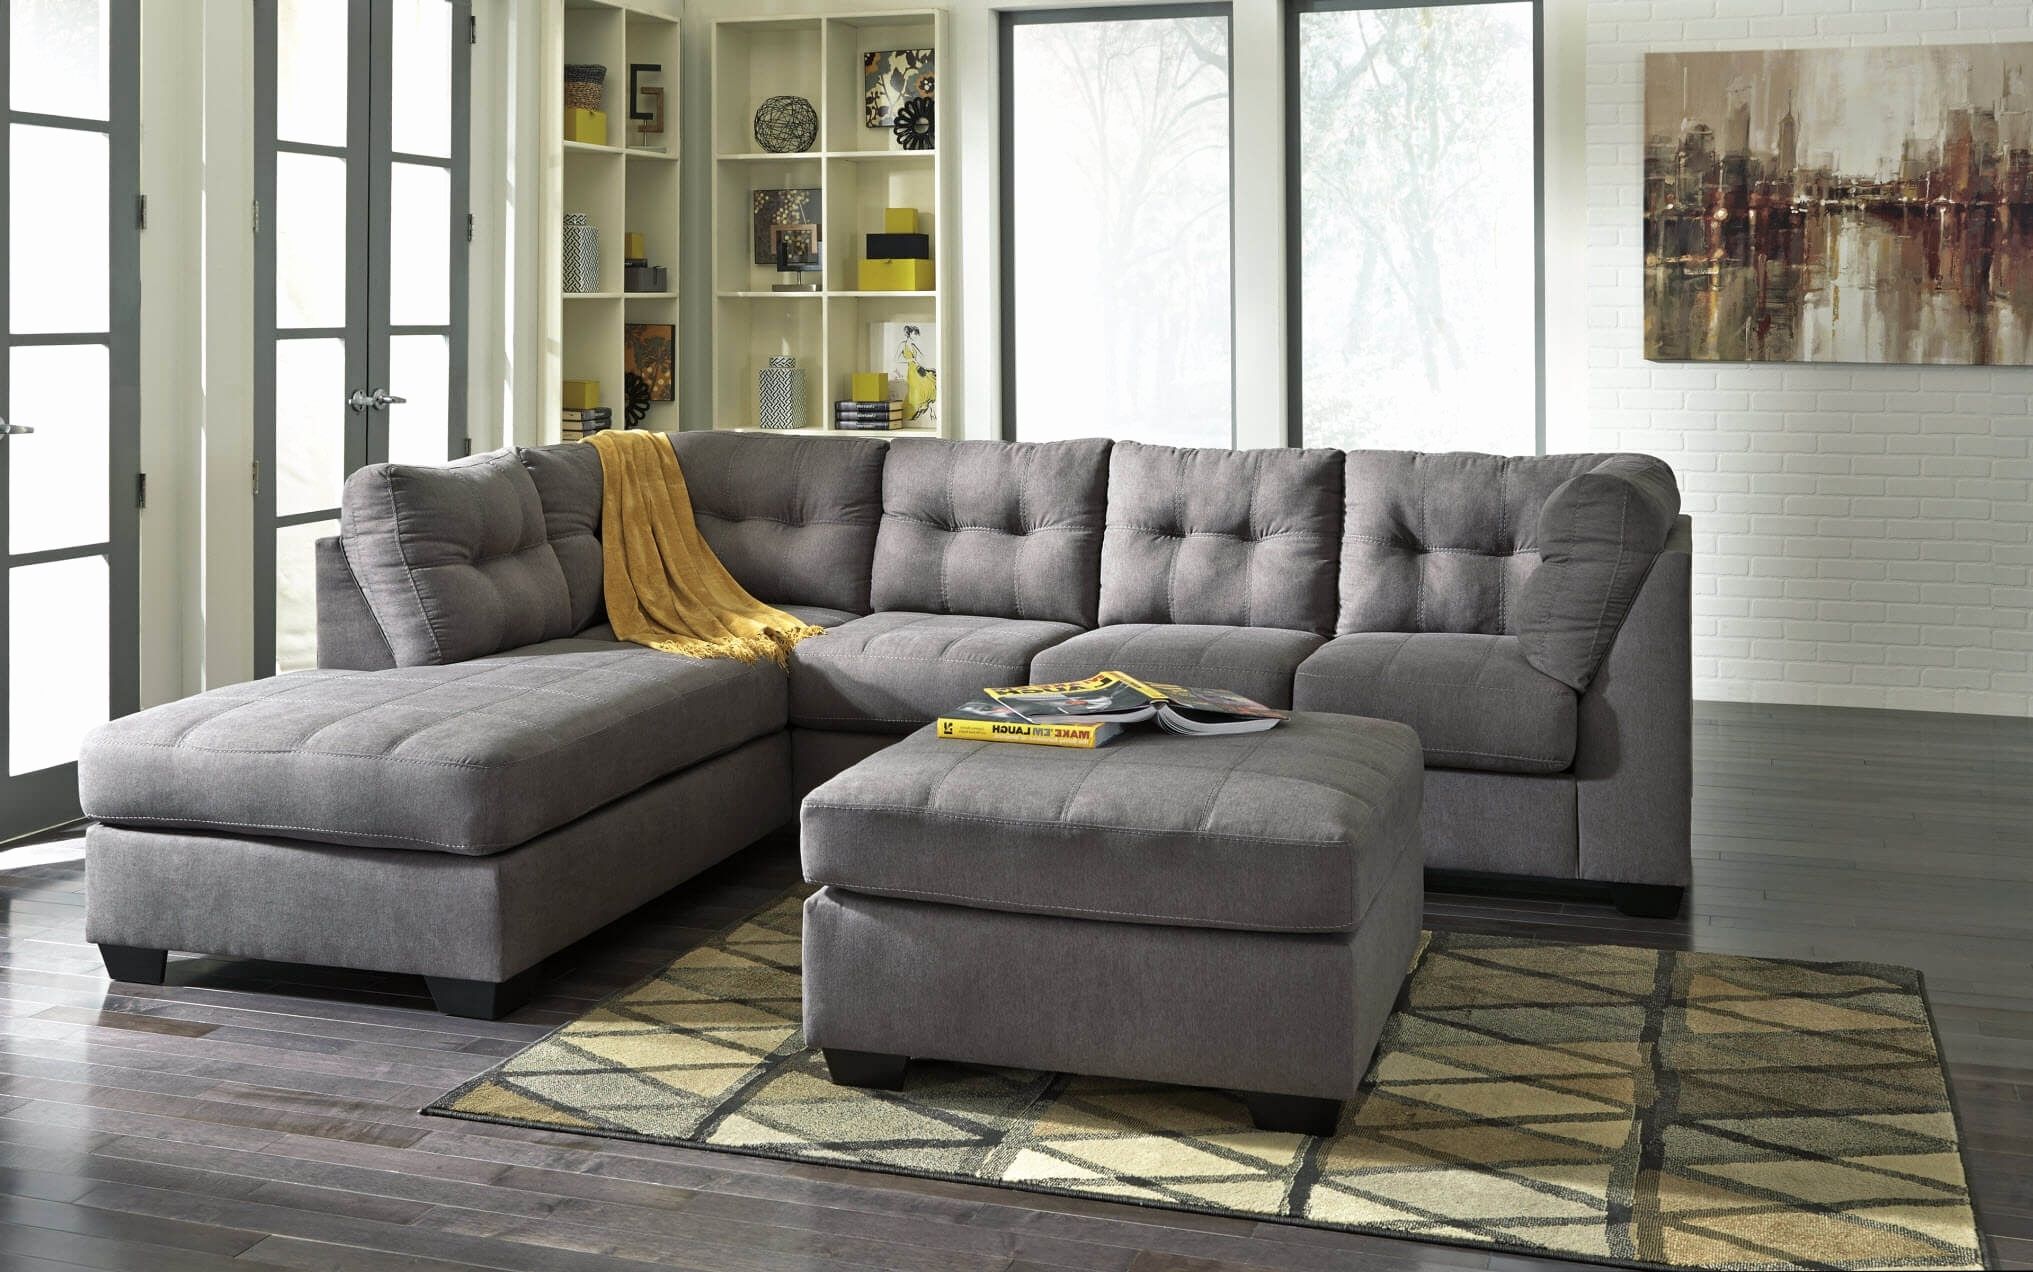 Sectional Sofa Furniture Row Archives – Seatersofa In Furniture Row Sectional Sofas (View 5 of 10)